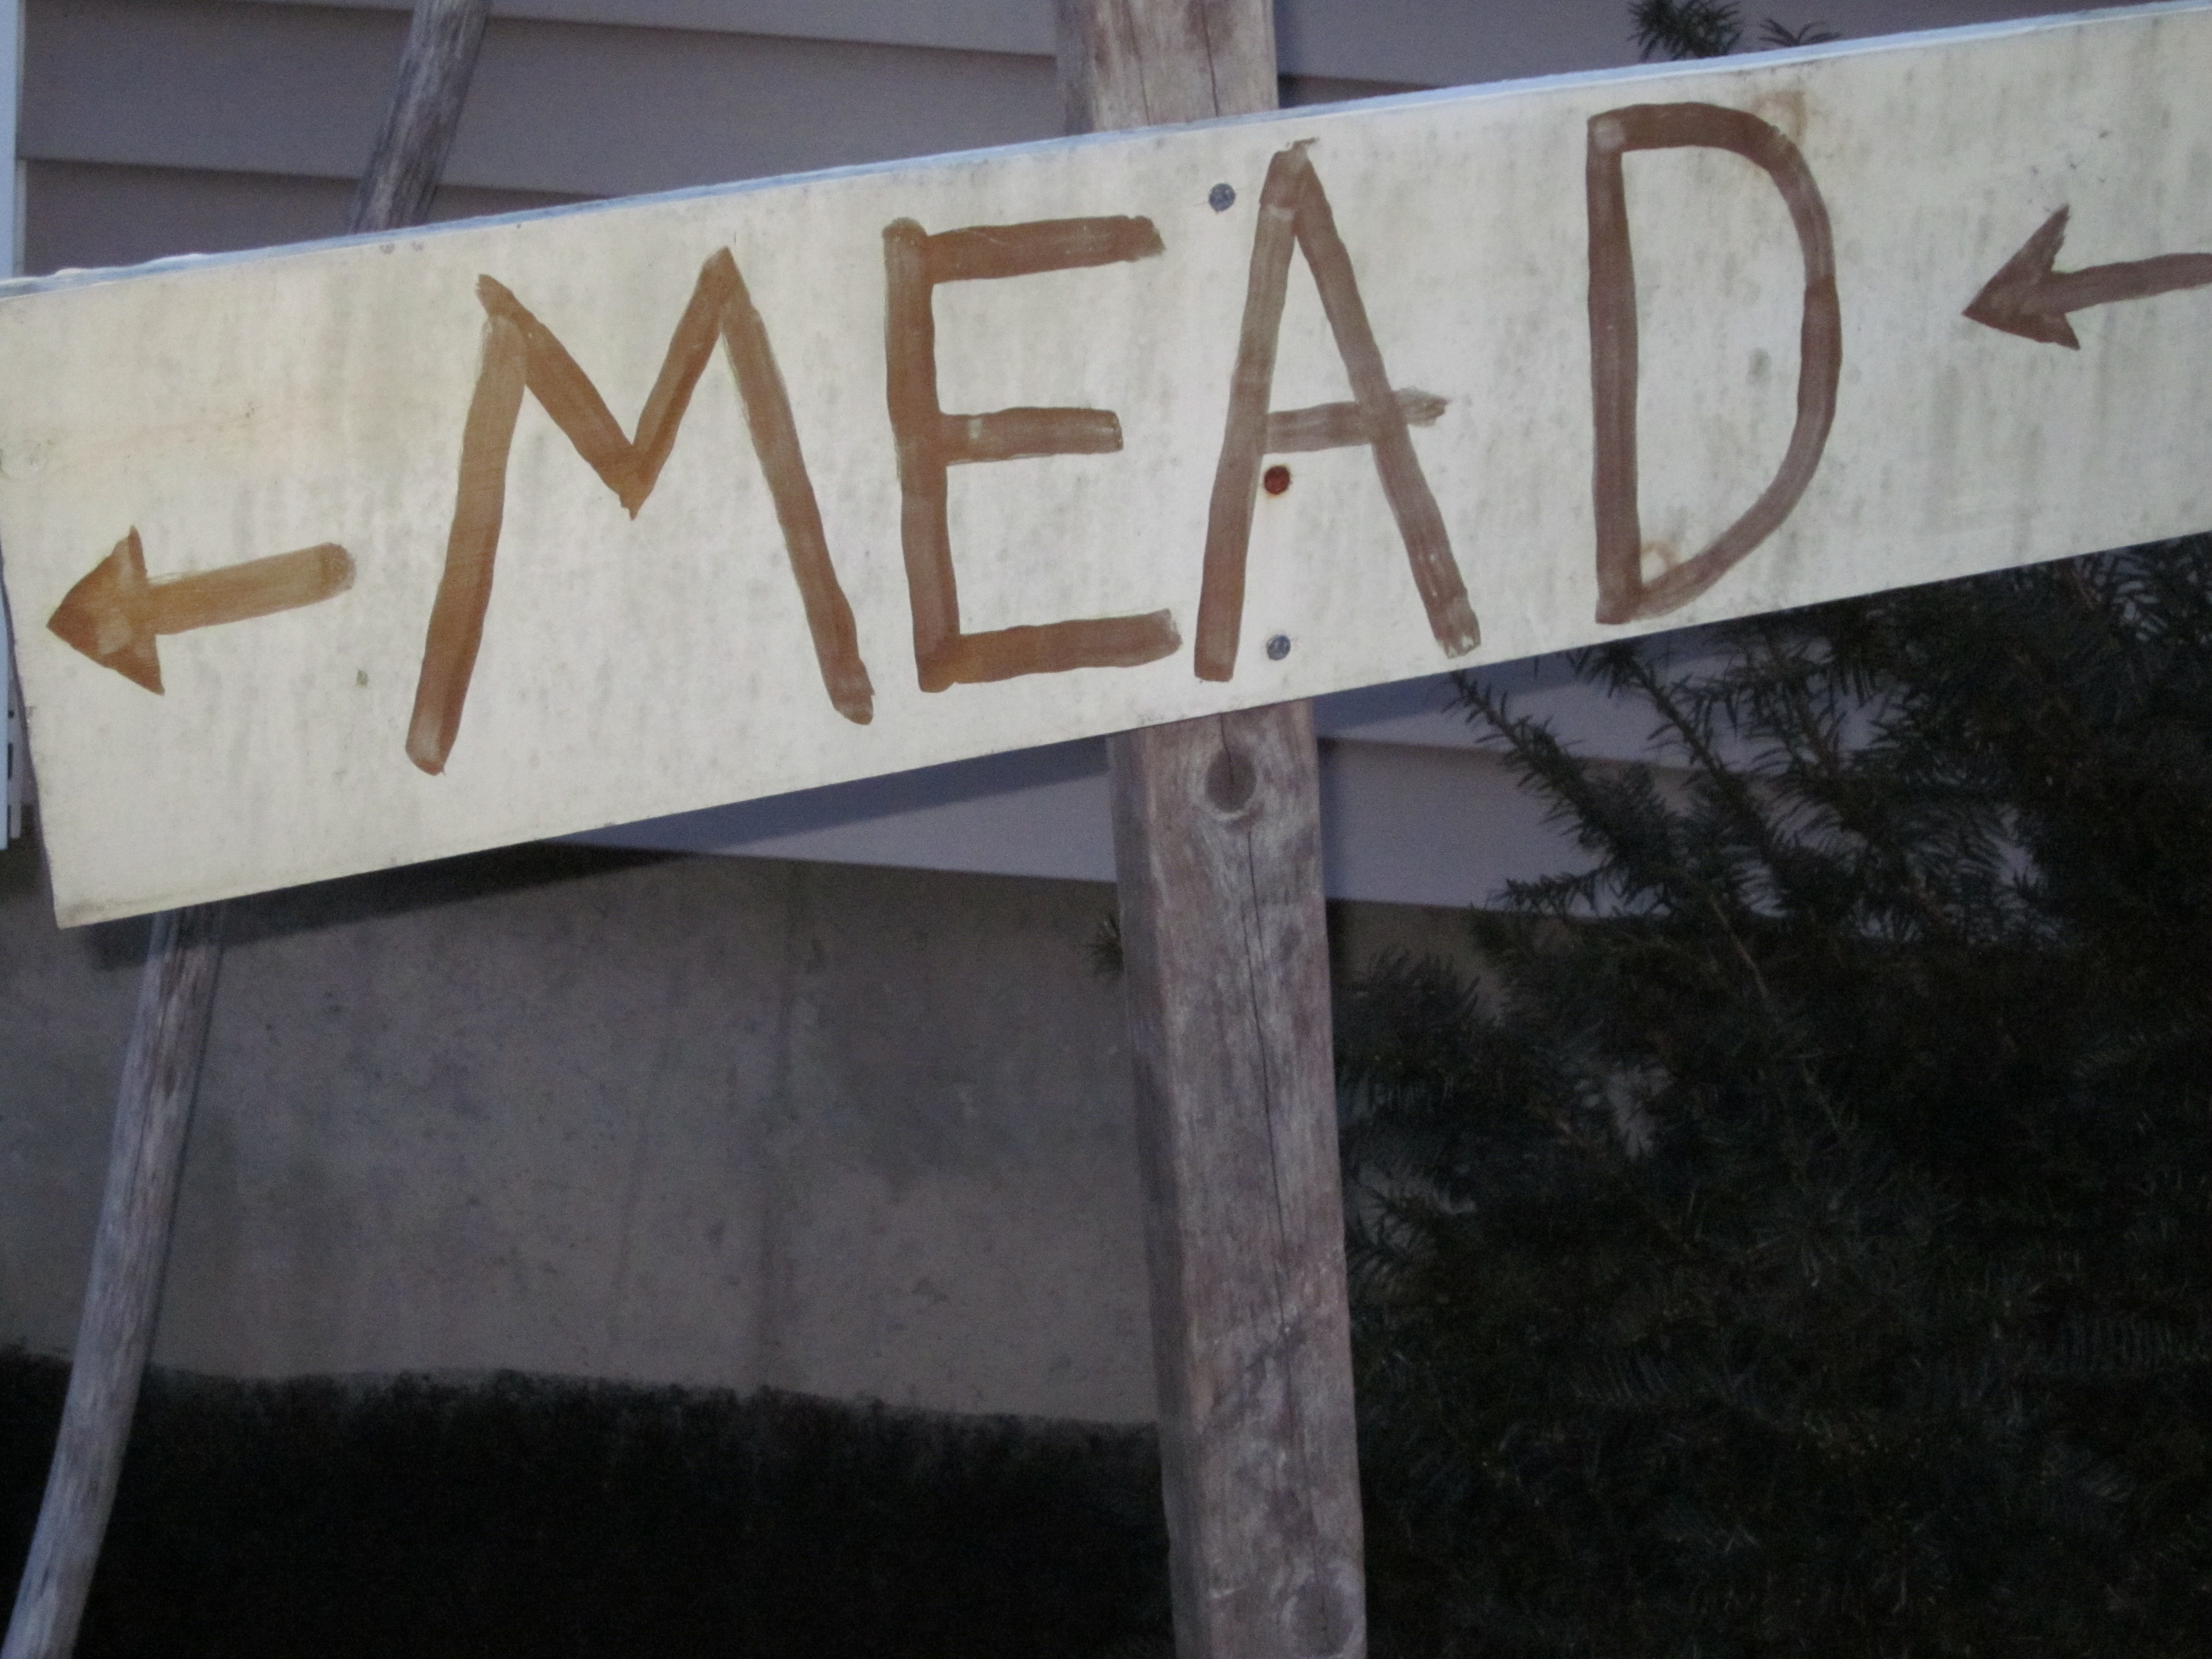 Mead - this way!